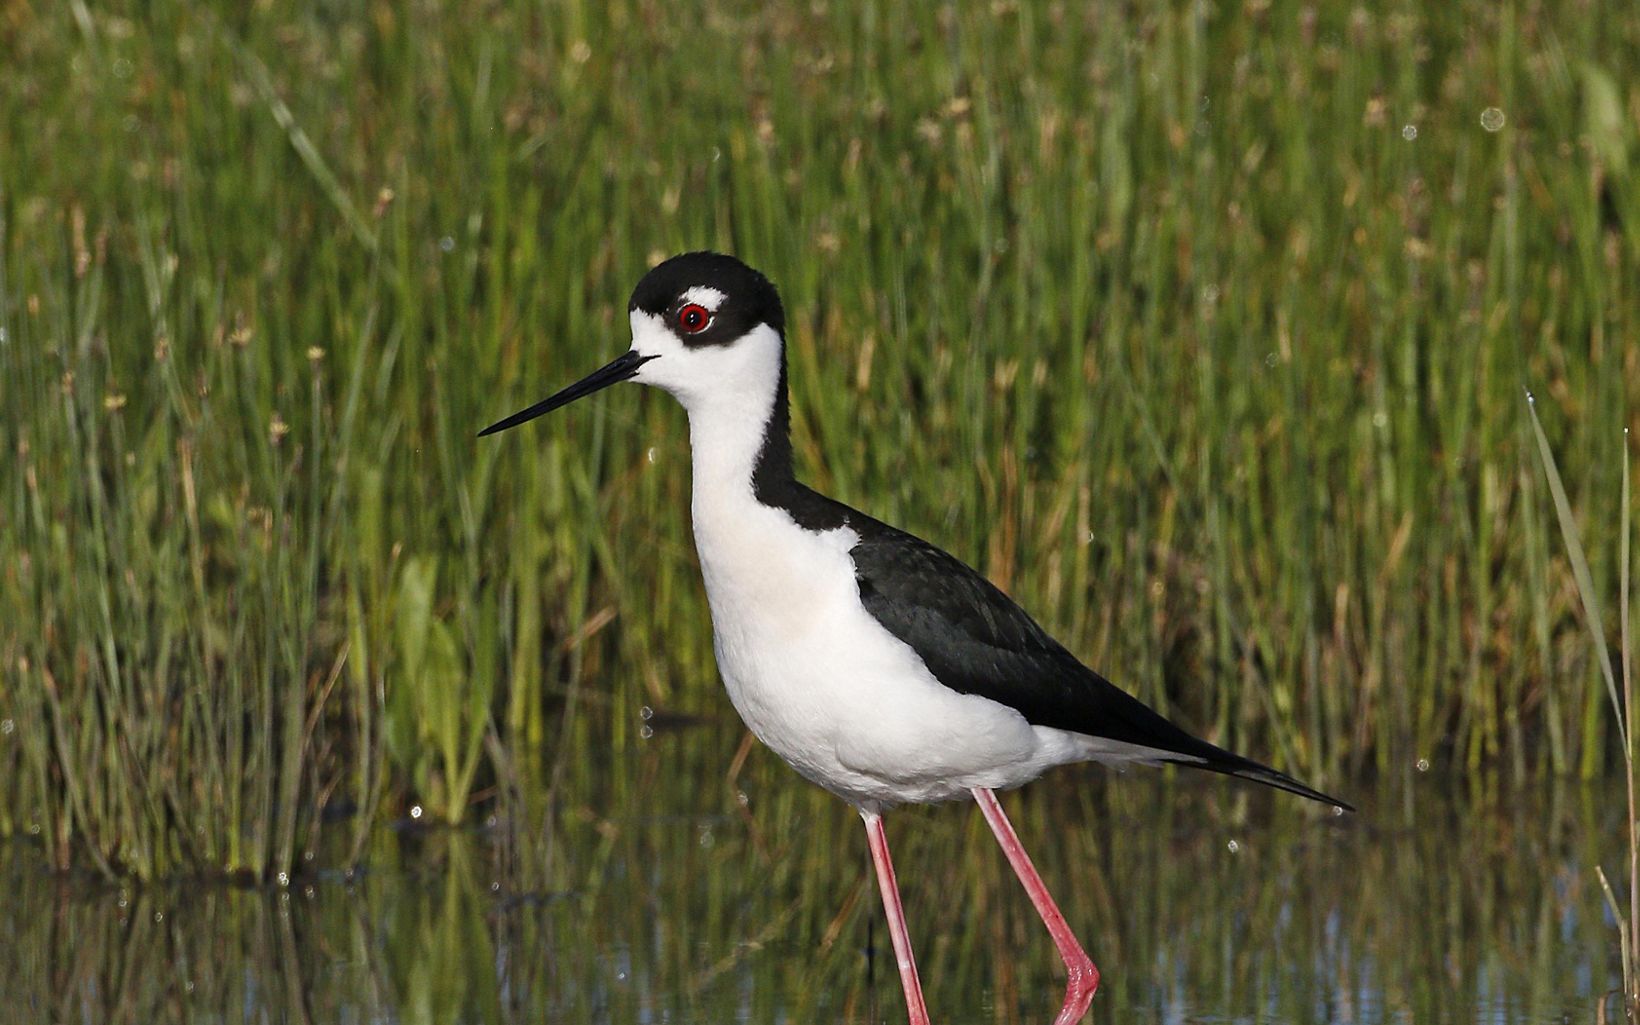 Black and white bird with black bill and bright red legs stands in a grassy marsh.